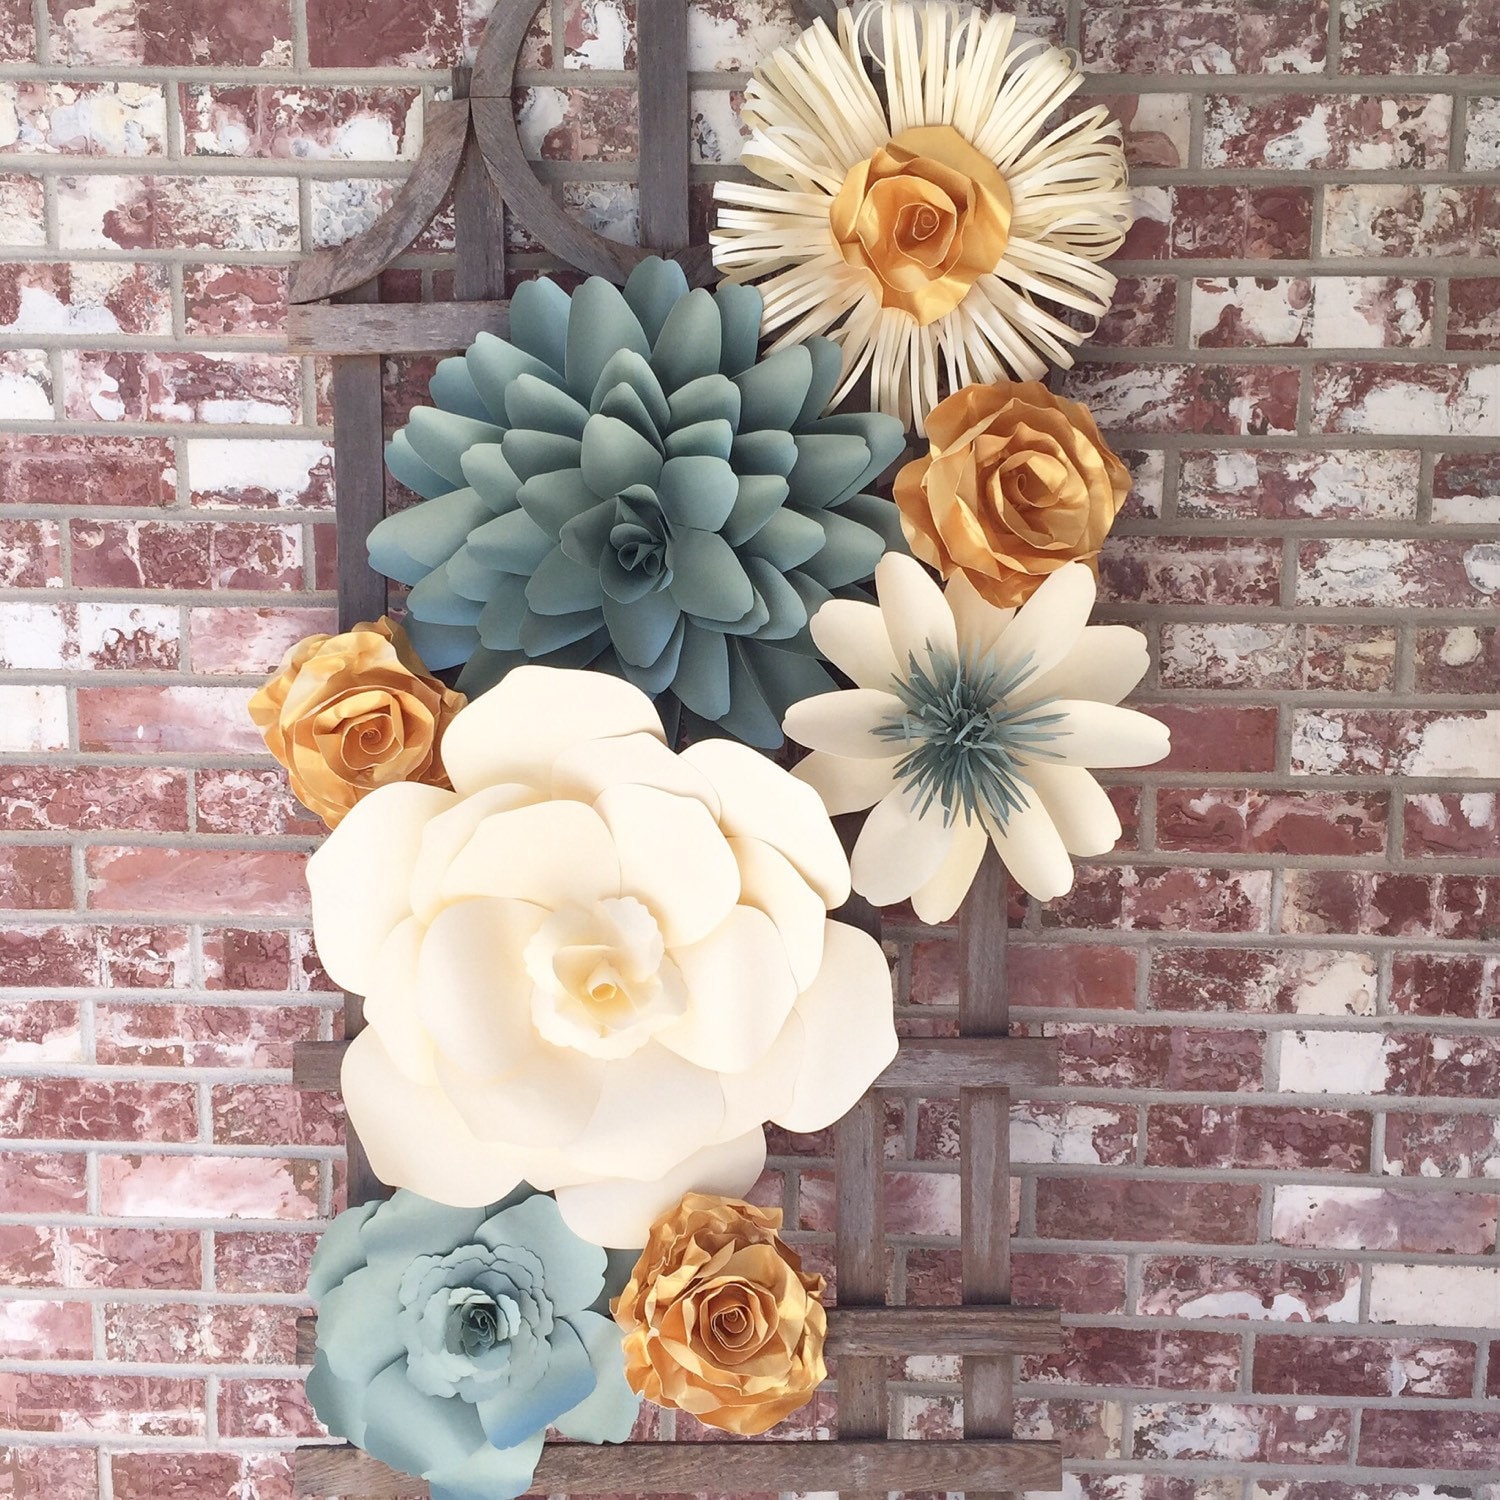 Large Paper Flower Wall Decor for Weddings Bridal Showers